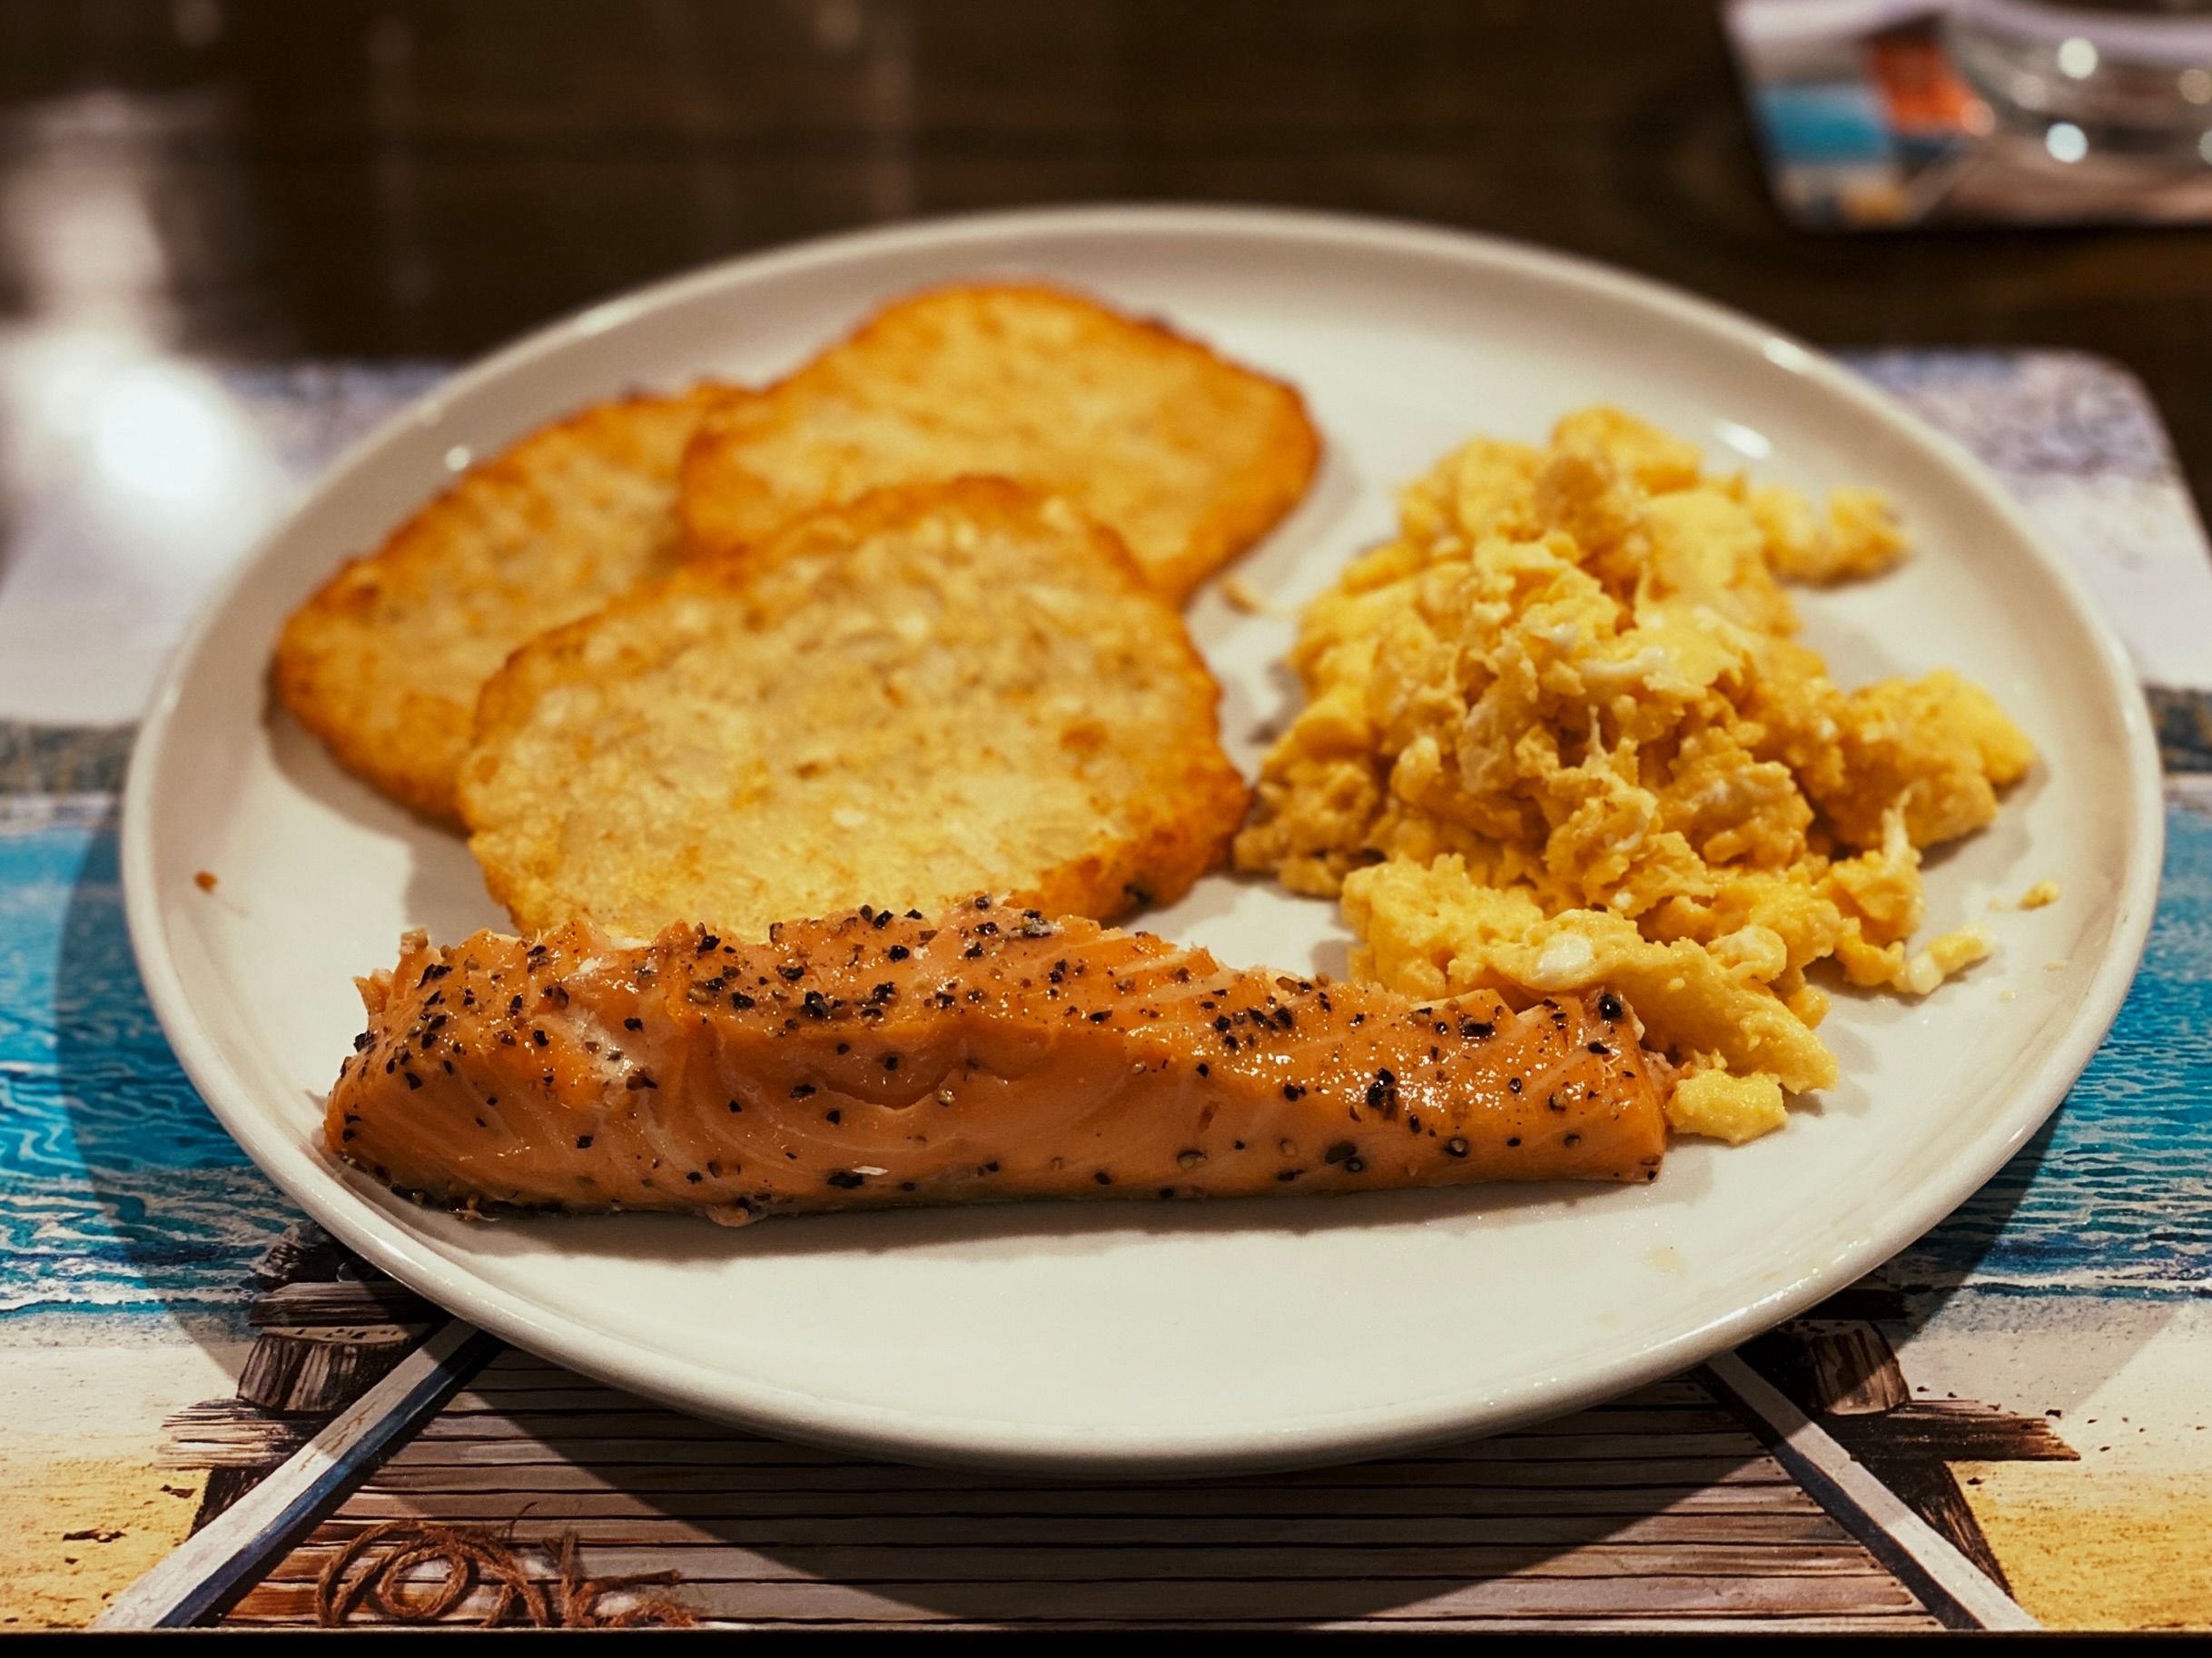 A slightly arty photo (i.e. taken with portrait mode so there's a nice narrow depth of field) of a slice of smoked salmon sitting on a plate alongside three golden-brown hash browns and a pile of scrambled eggs.